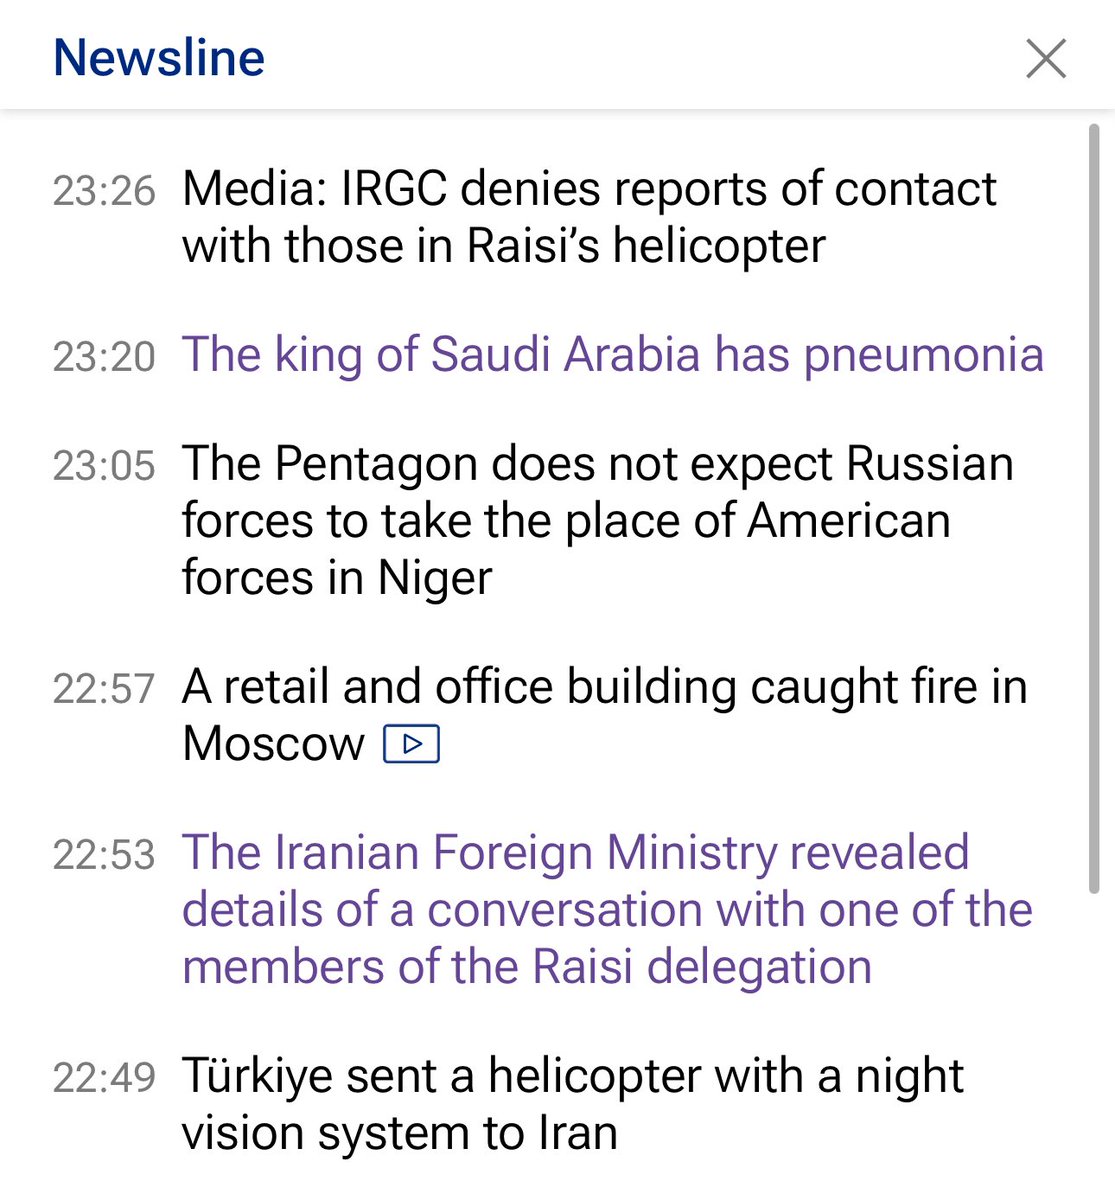 News flow out of Iran is more bizarre than Russia. Something is announced then retracted. In the latest RIA citing Irans foreign ministry said that someone in the helicopter made contact. Shortly after IRGC denies those reports. Bizarre